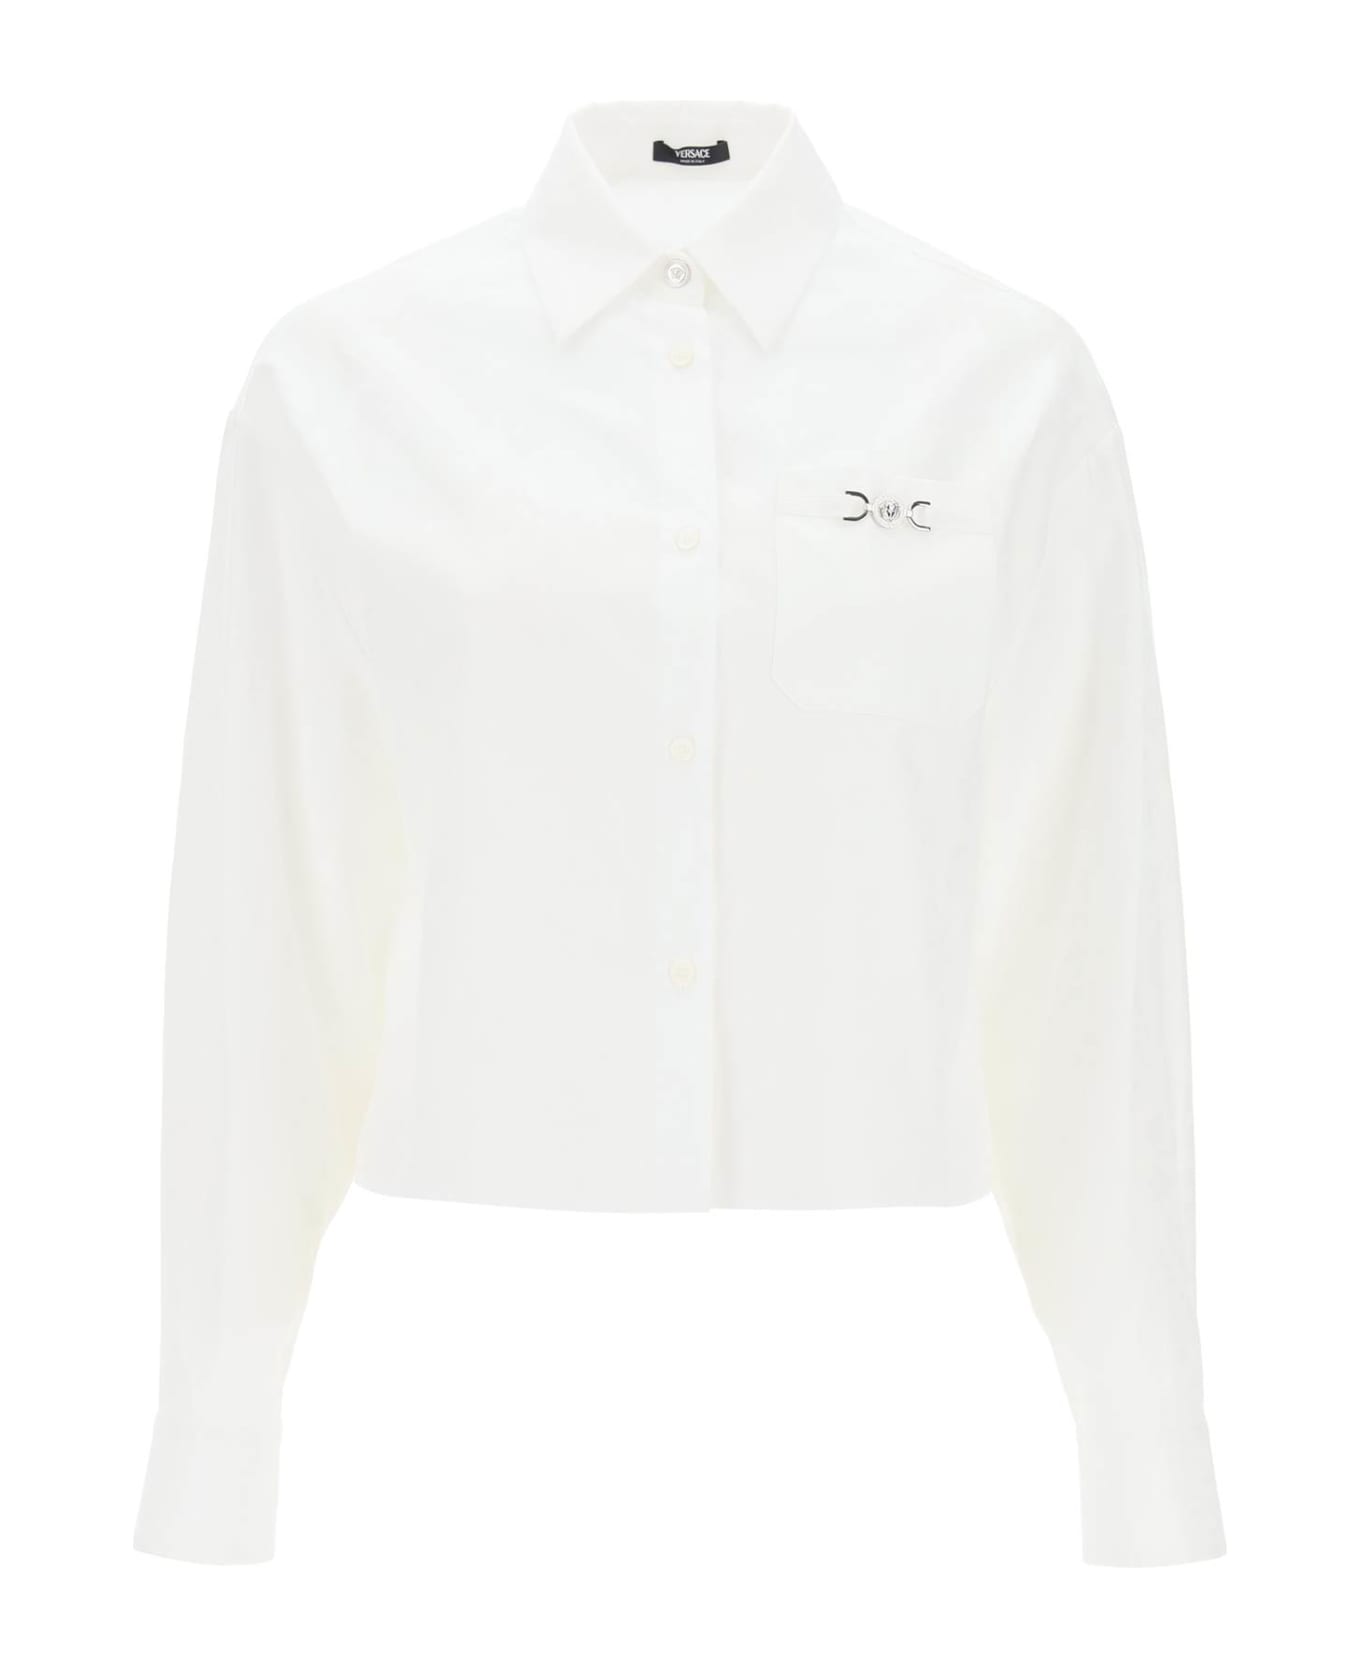 Versace Barocco Cropped Shirt - OPTICAL WHITE (White) シャツ